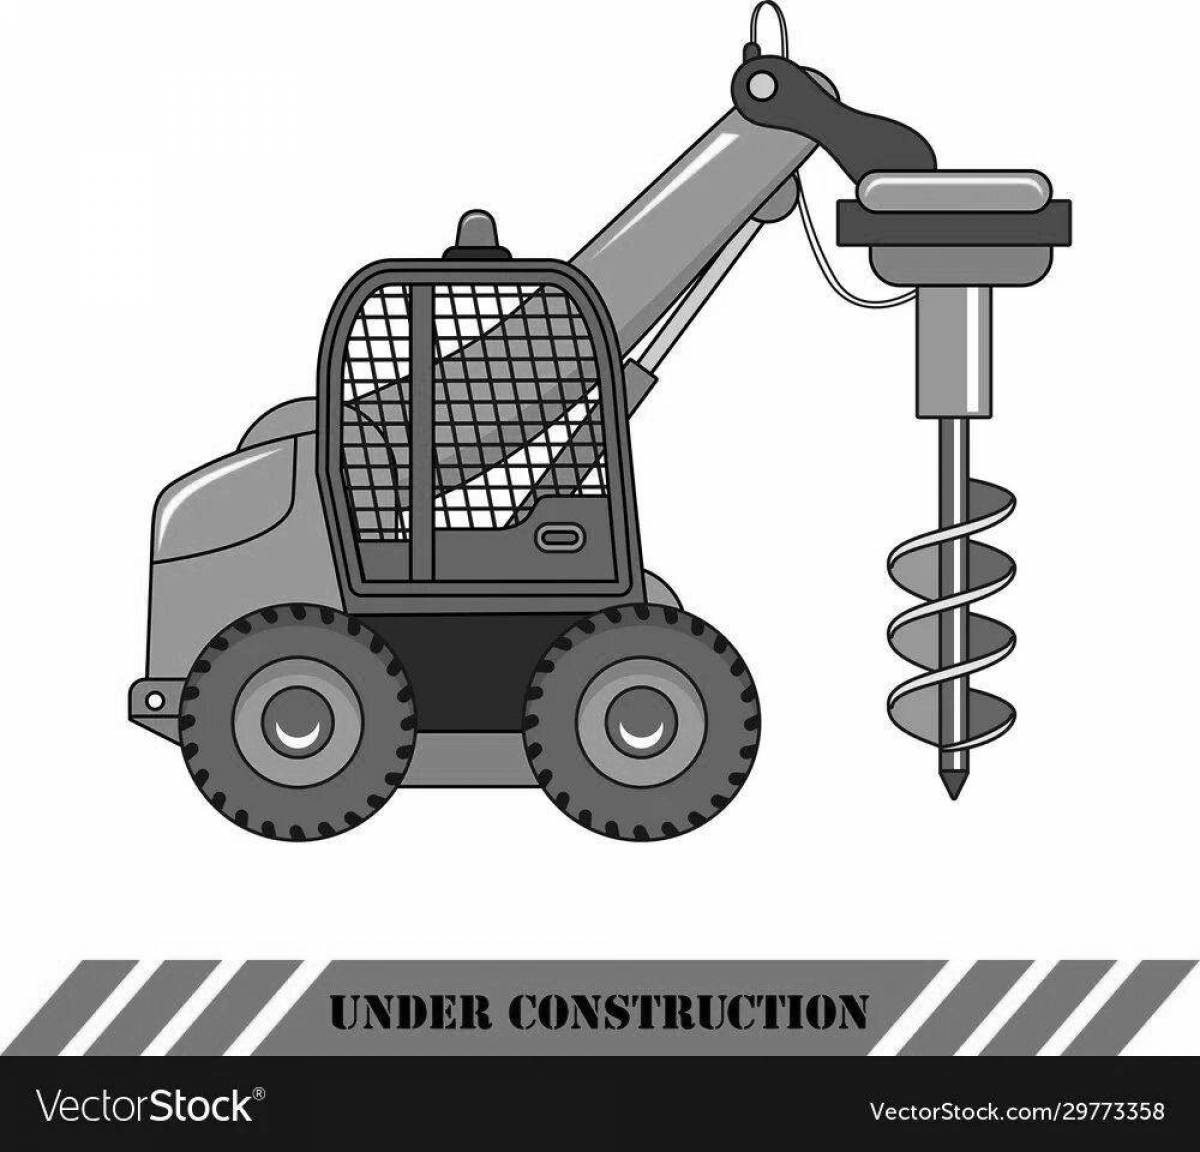 Coloring page of the drilling machine